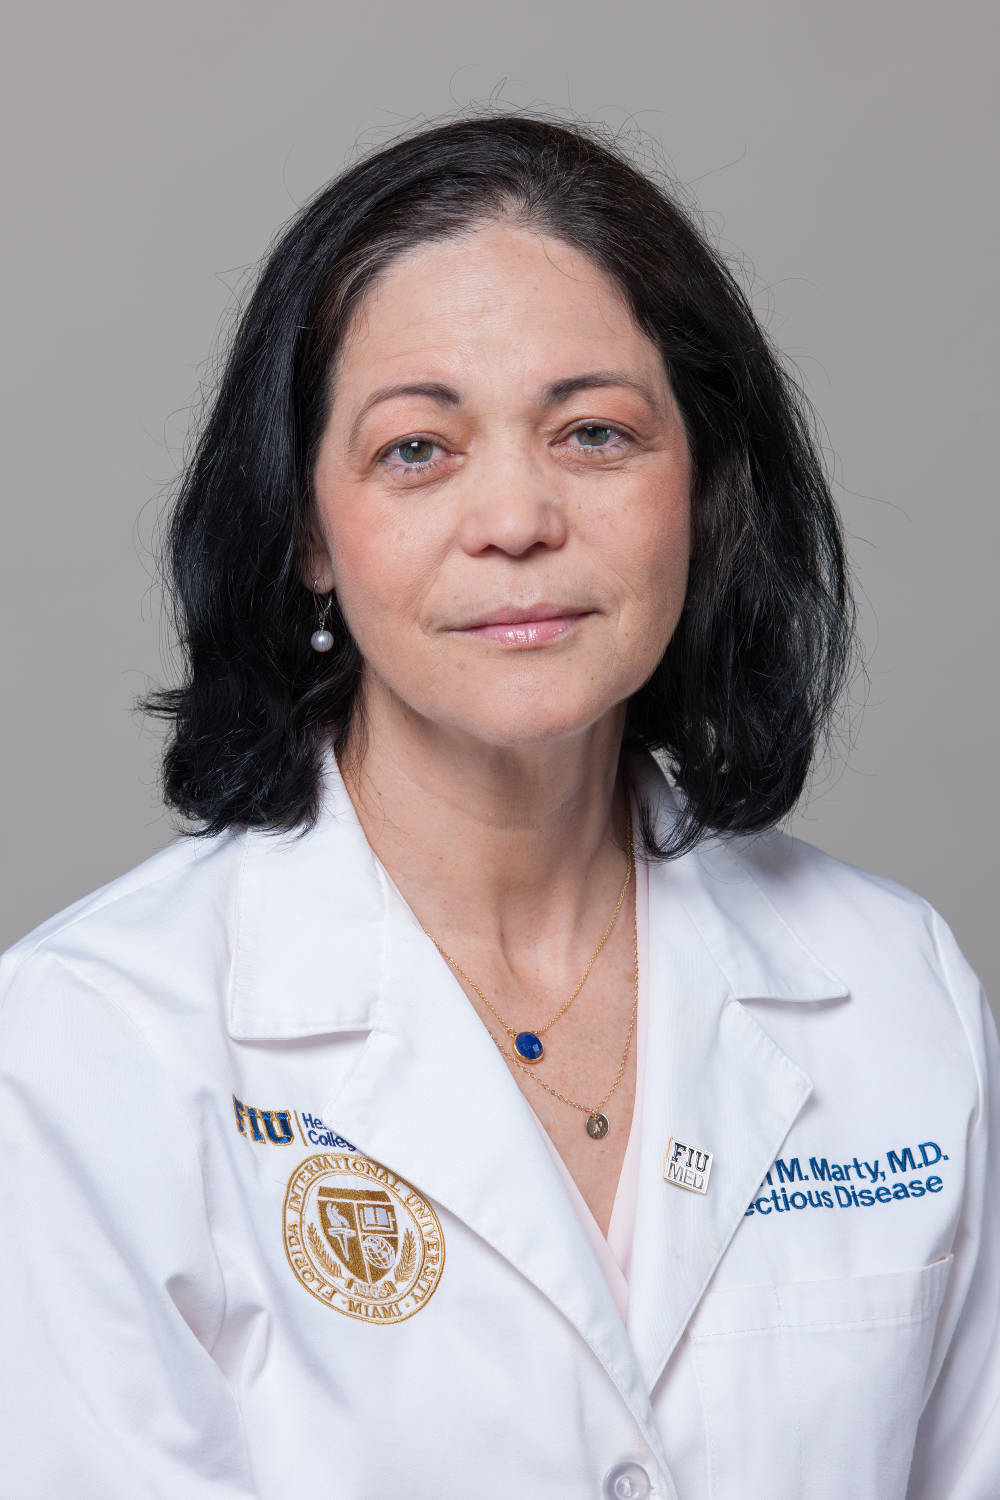 Dr. Aileen Marty